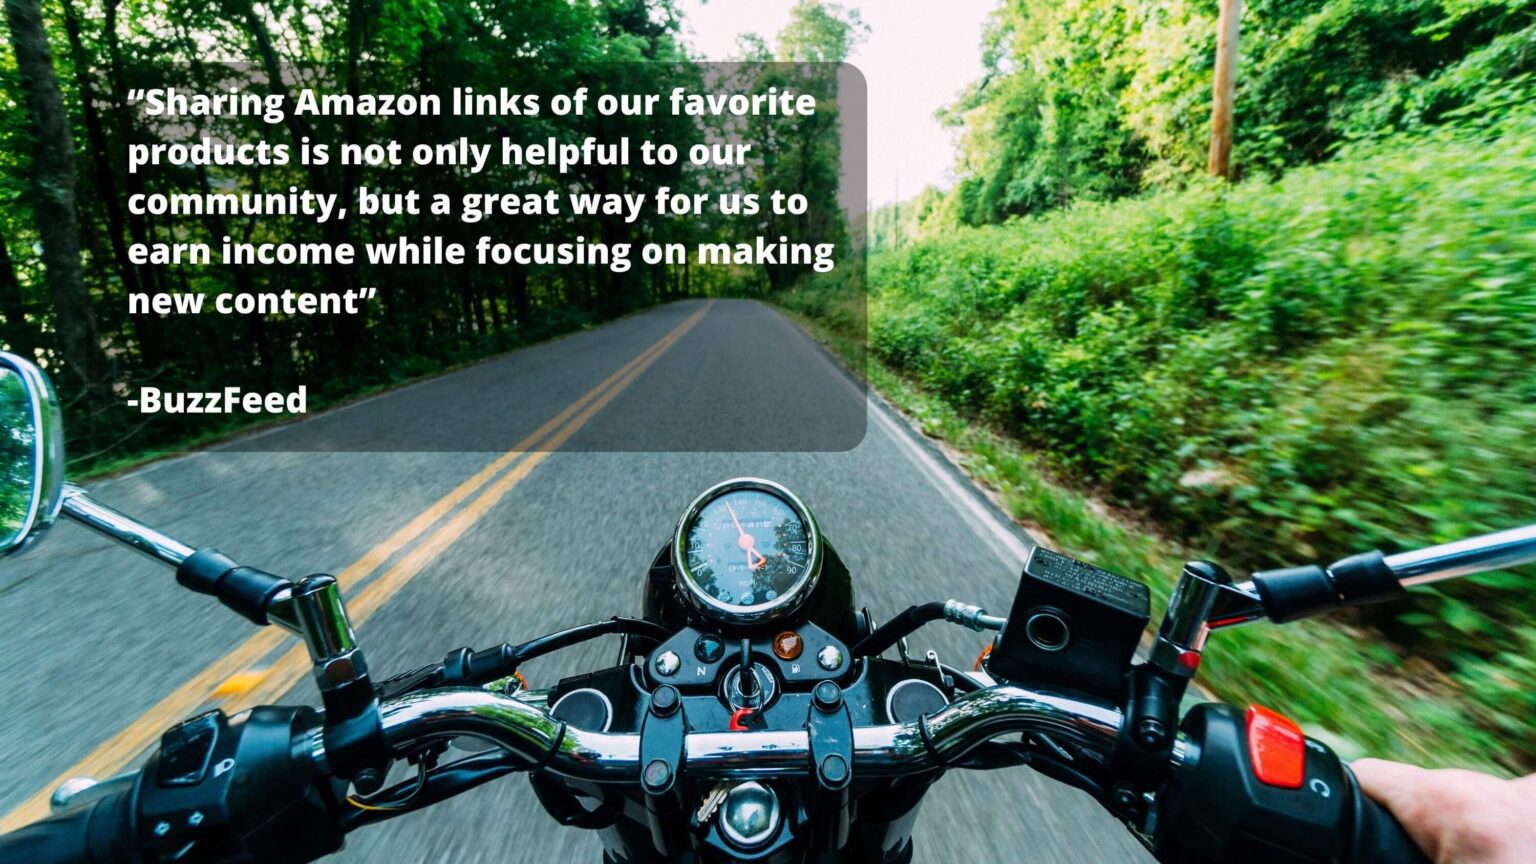 “Sharing Amazon links of our favorite products is not only helpful to our community, but a great way for us to earn income while focusing on making new content”